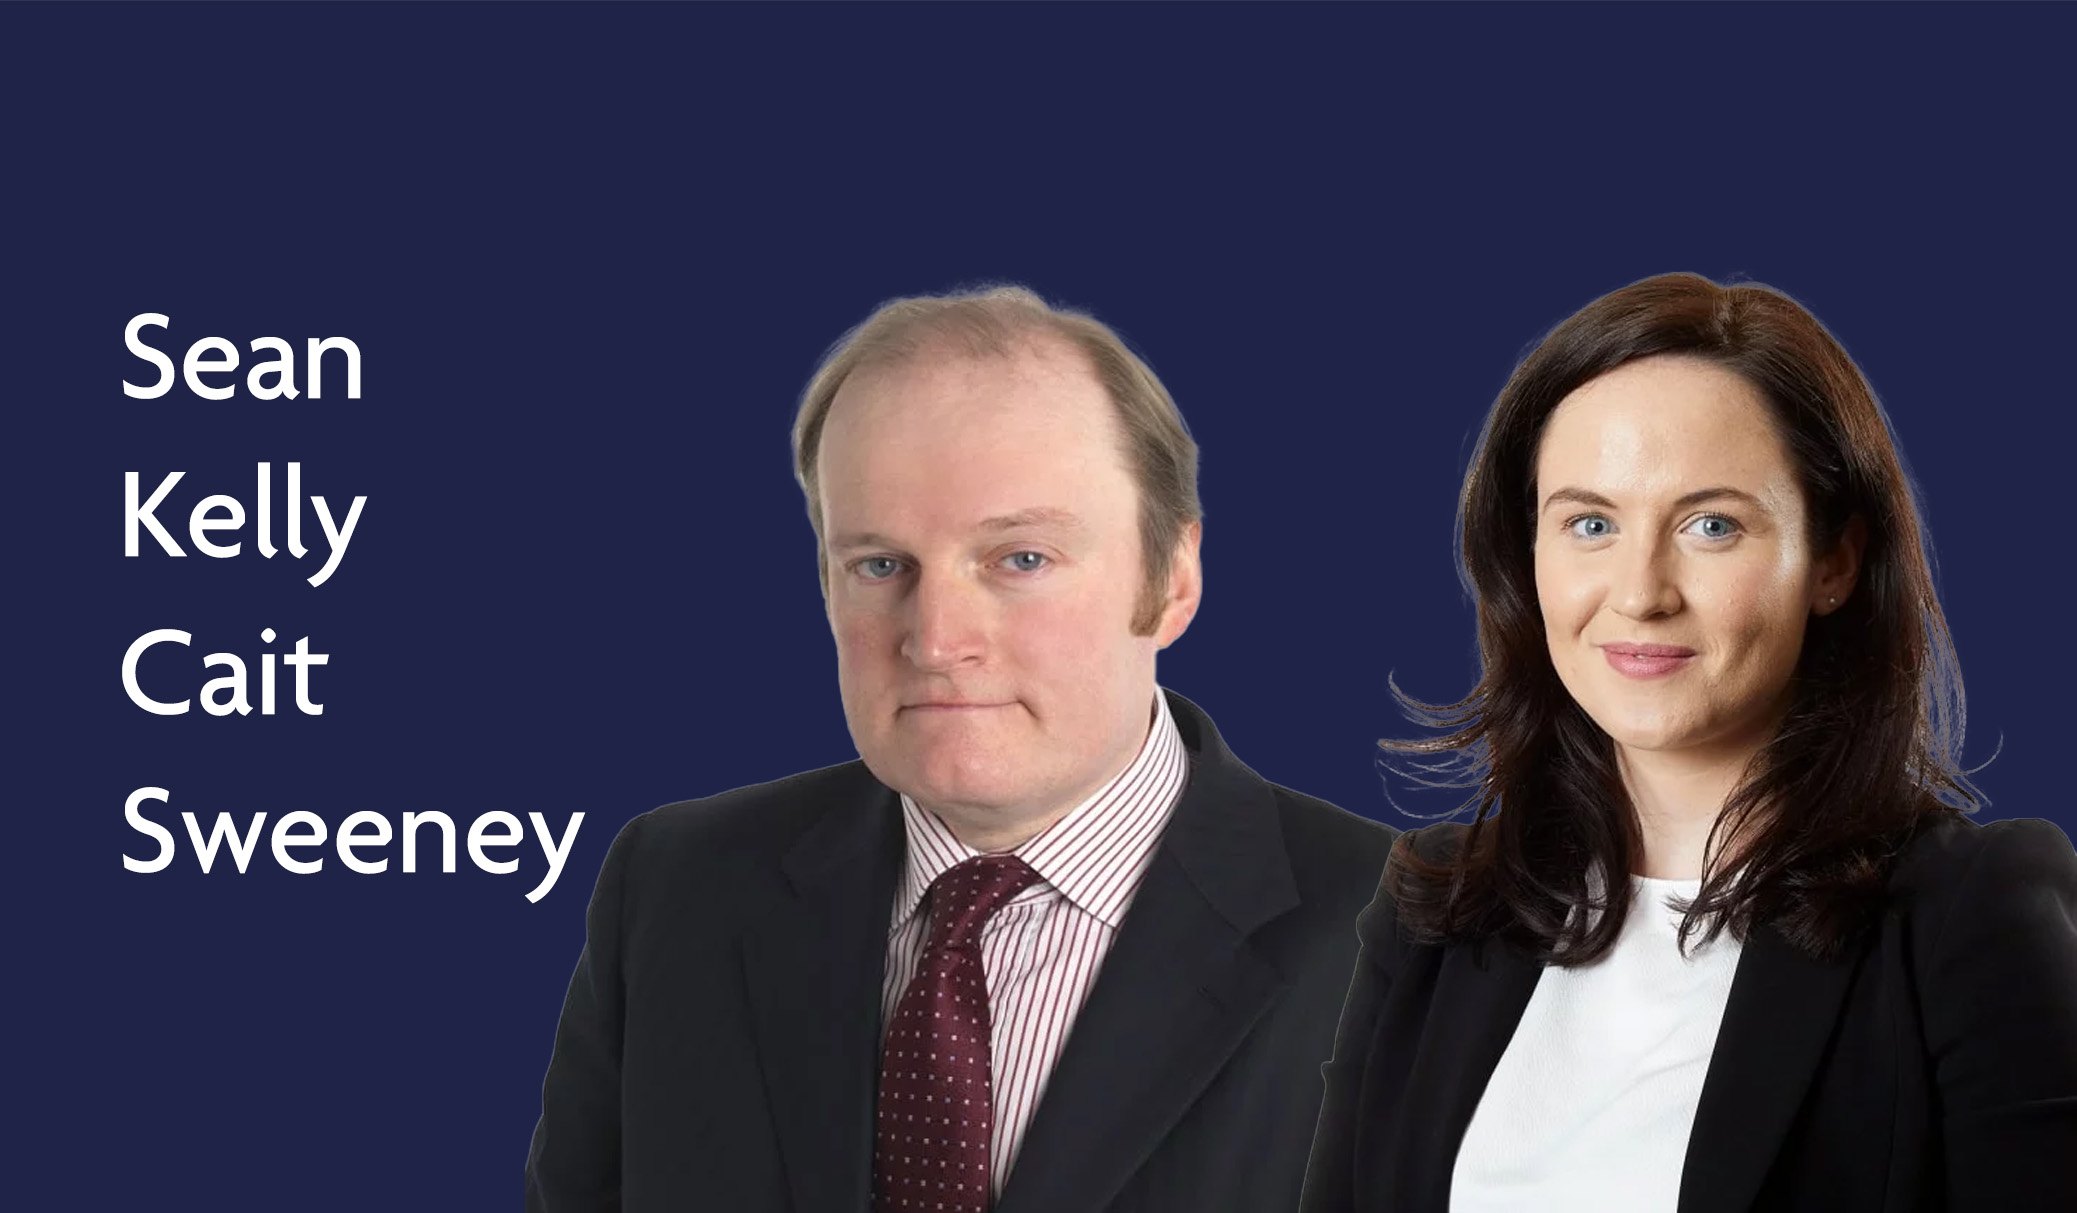 Sean Kelly and Cait Sweeney to speak at the Property Bar Association’s Leeds Conference